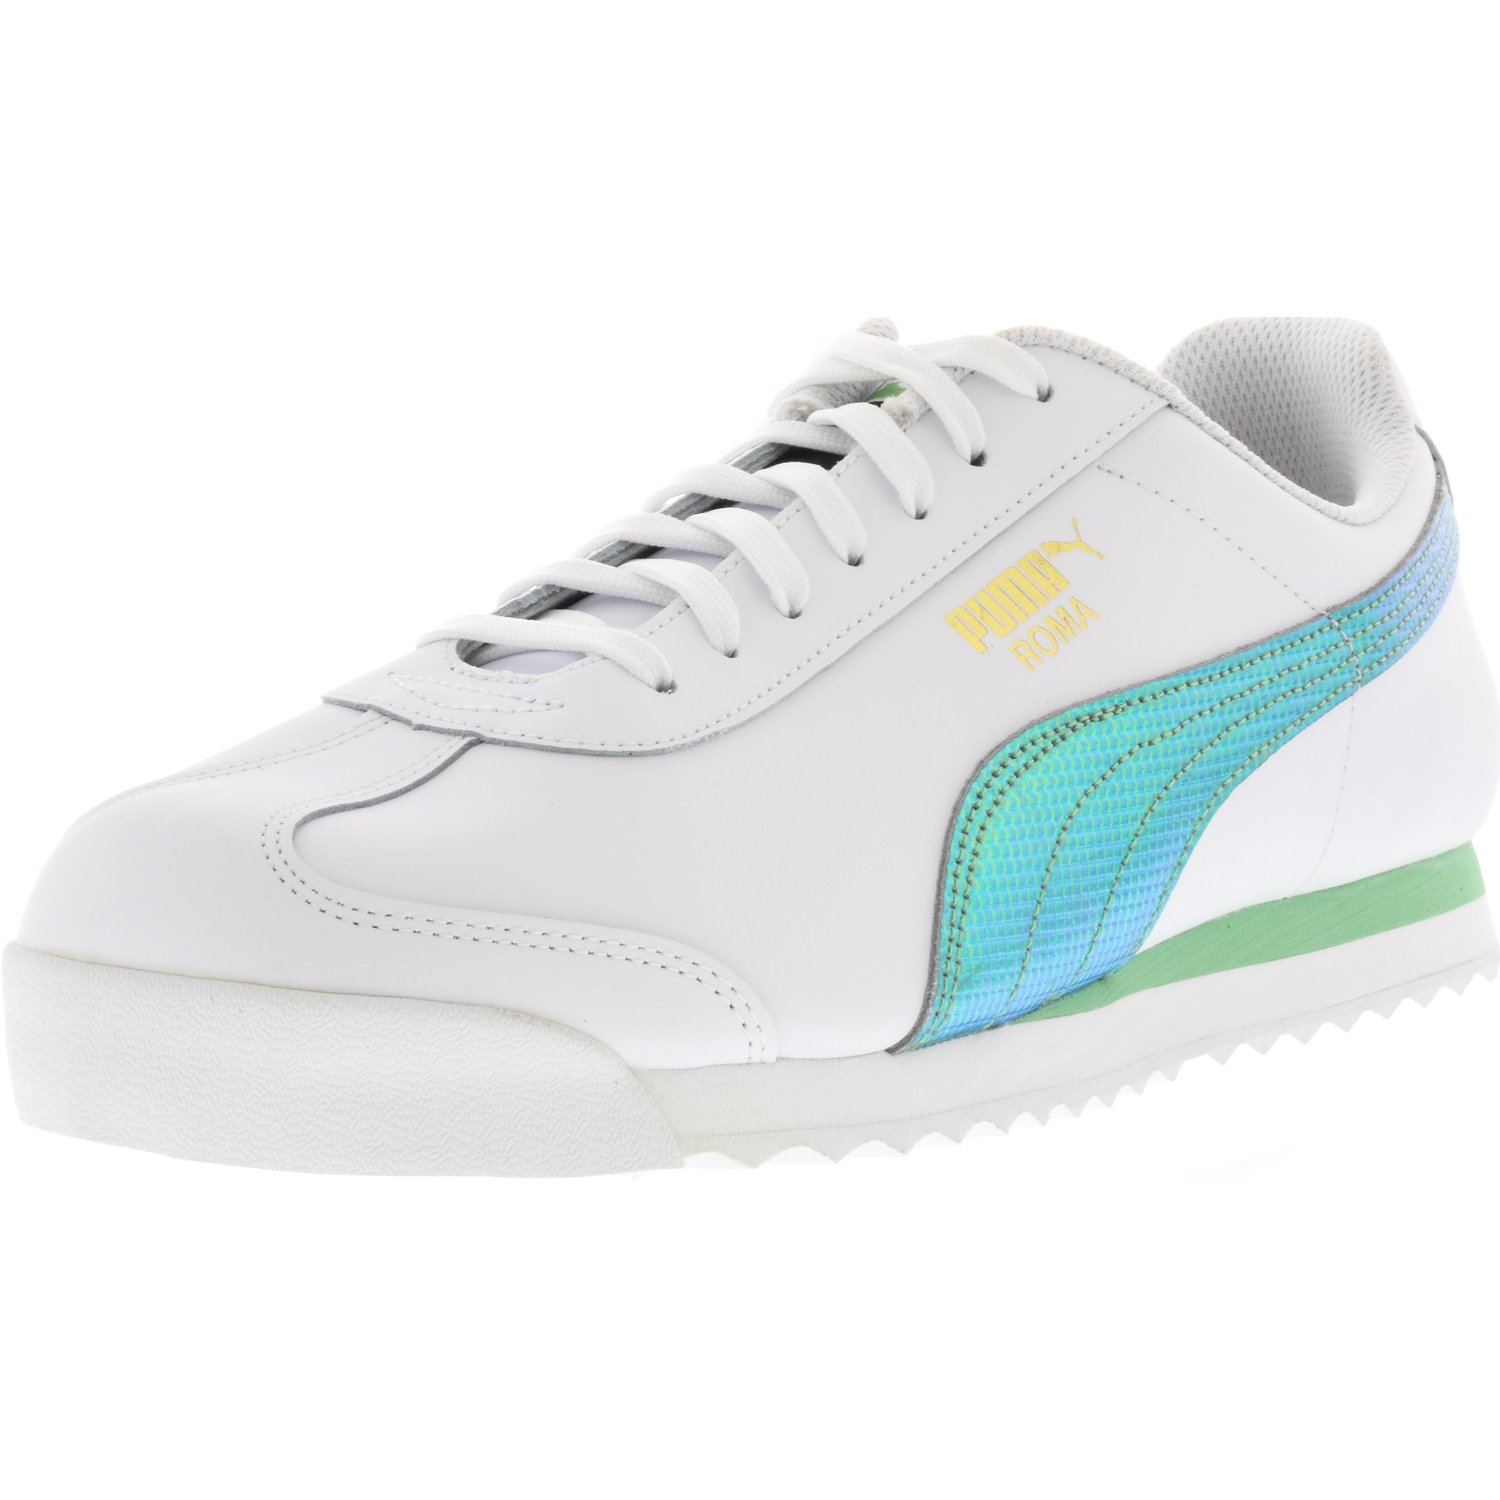 Puma Men's Roma Basic Holo White / Green Gecko Ankle-High Leather Fashion Sneaker - 11.5M - image 1 of 6